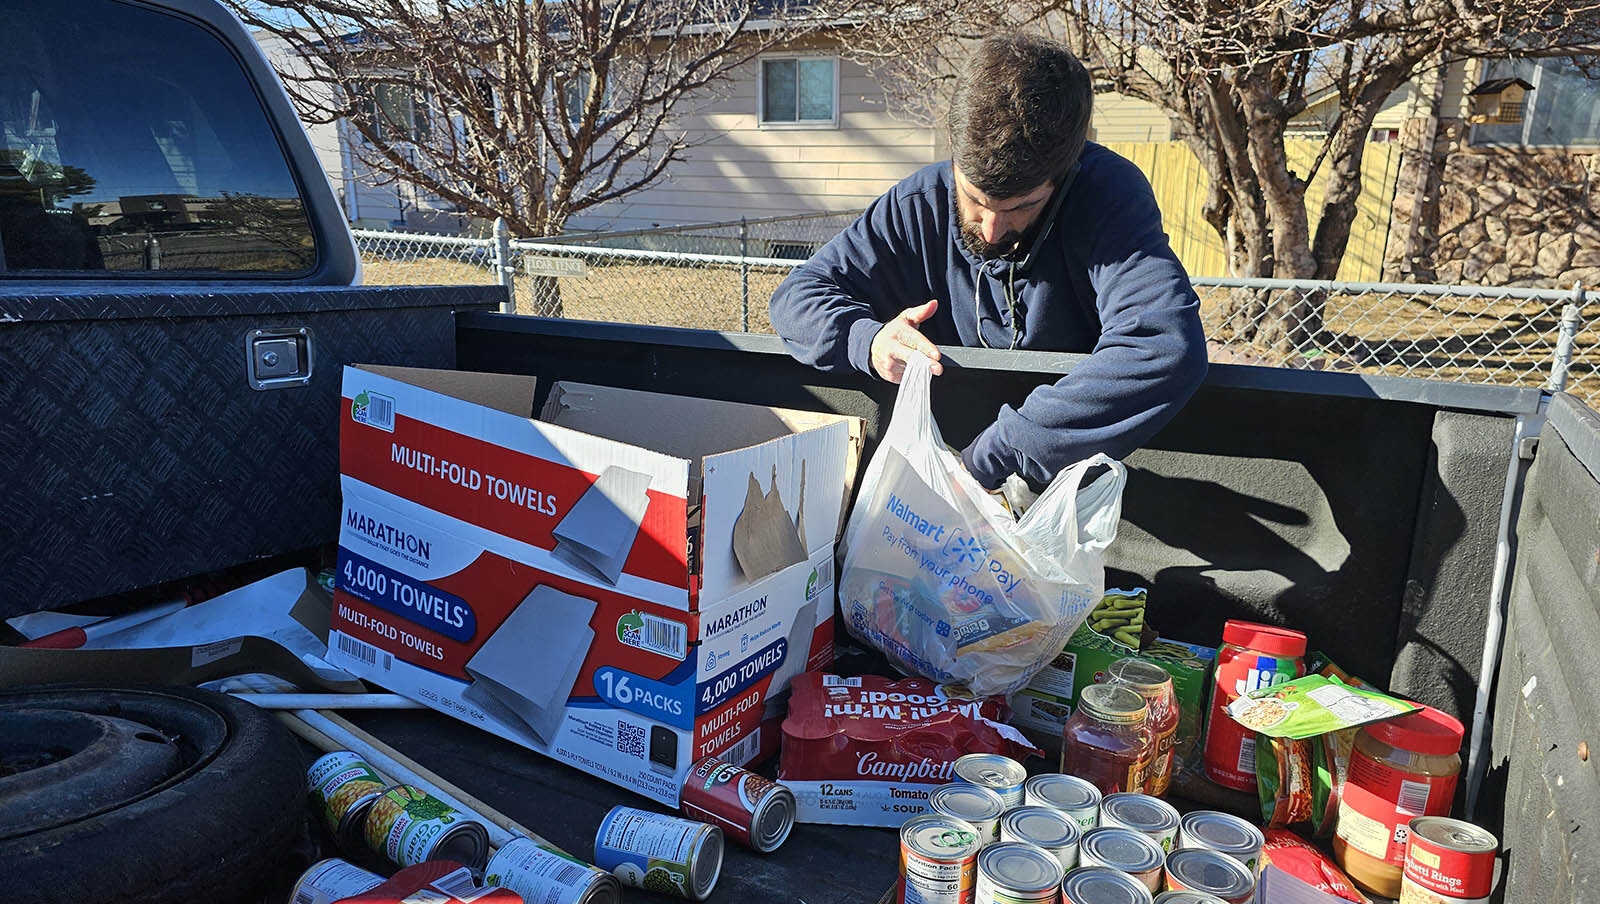 Landyn Medina sorts through some of the food donations he's been given to help Cheyenne families in the Cahill Park area. The families are in danger of losing their homes after a 12-inch water main broke last week.